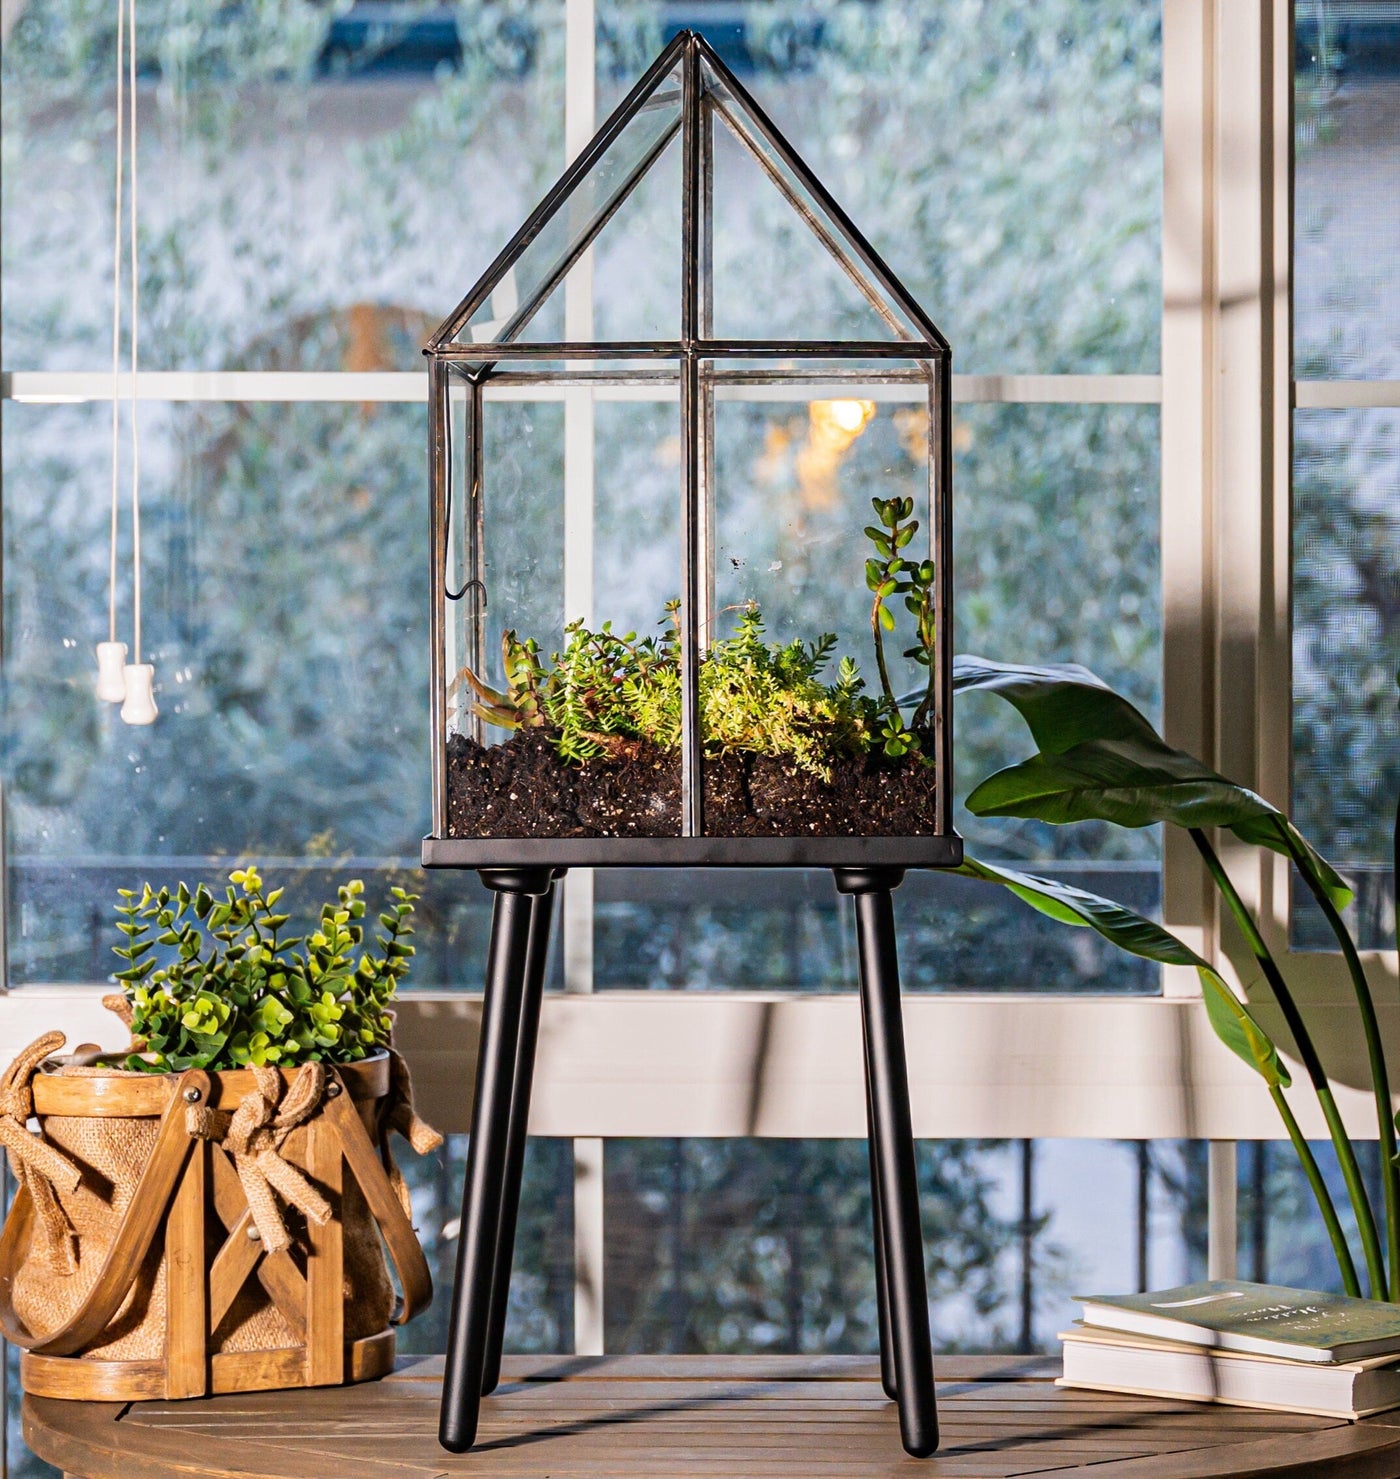 UB Extra Large Terrarium, Glass and Steel, Perfect for: Indoor Garden, Succulents, Cacti, Fern, Christmas and Wedding Gifts. (Black)